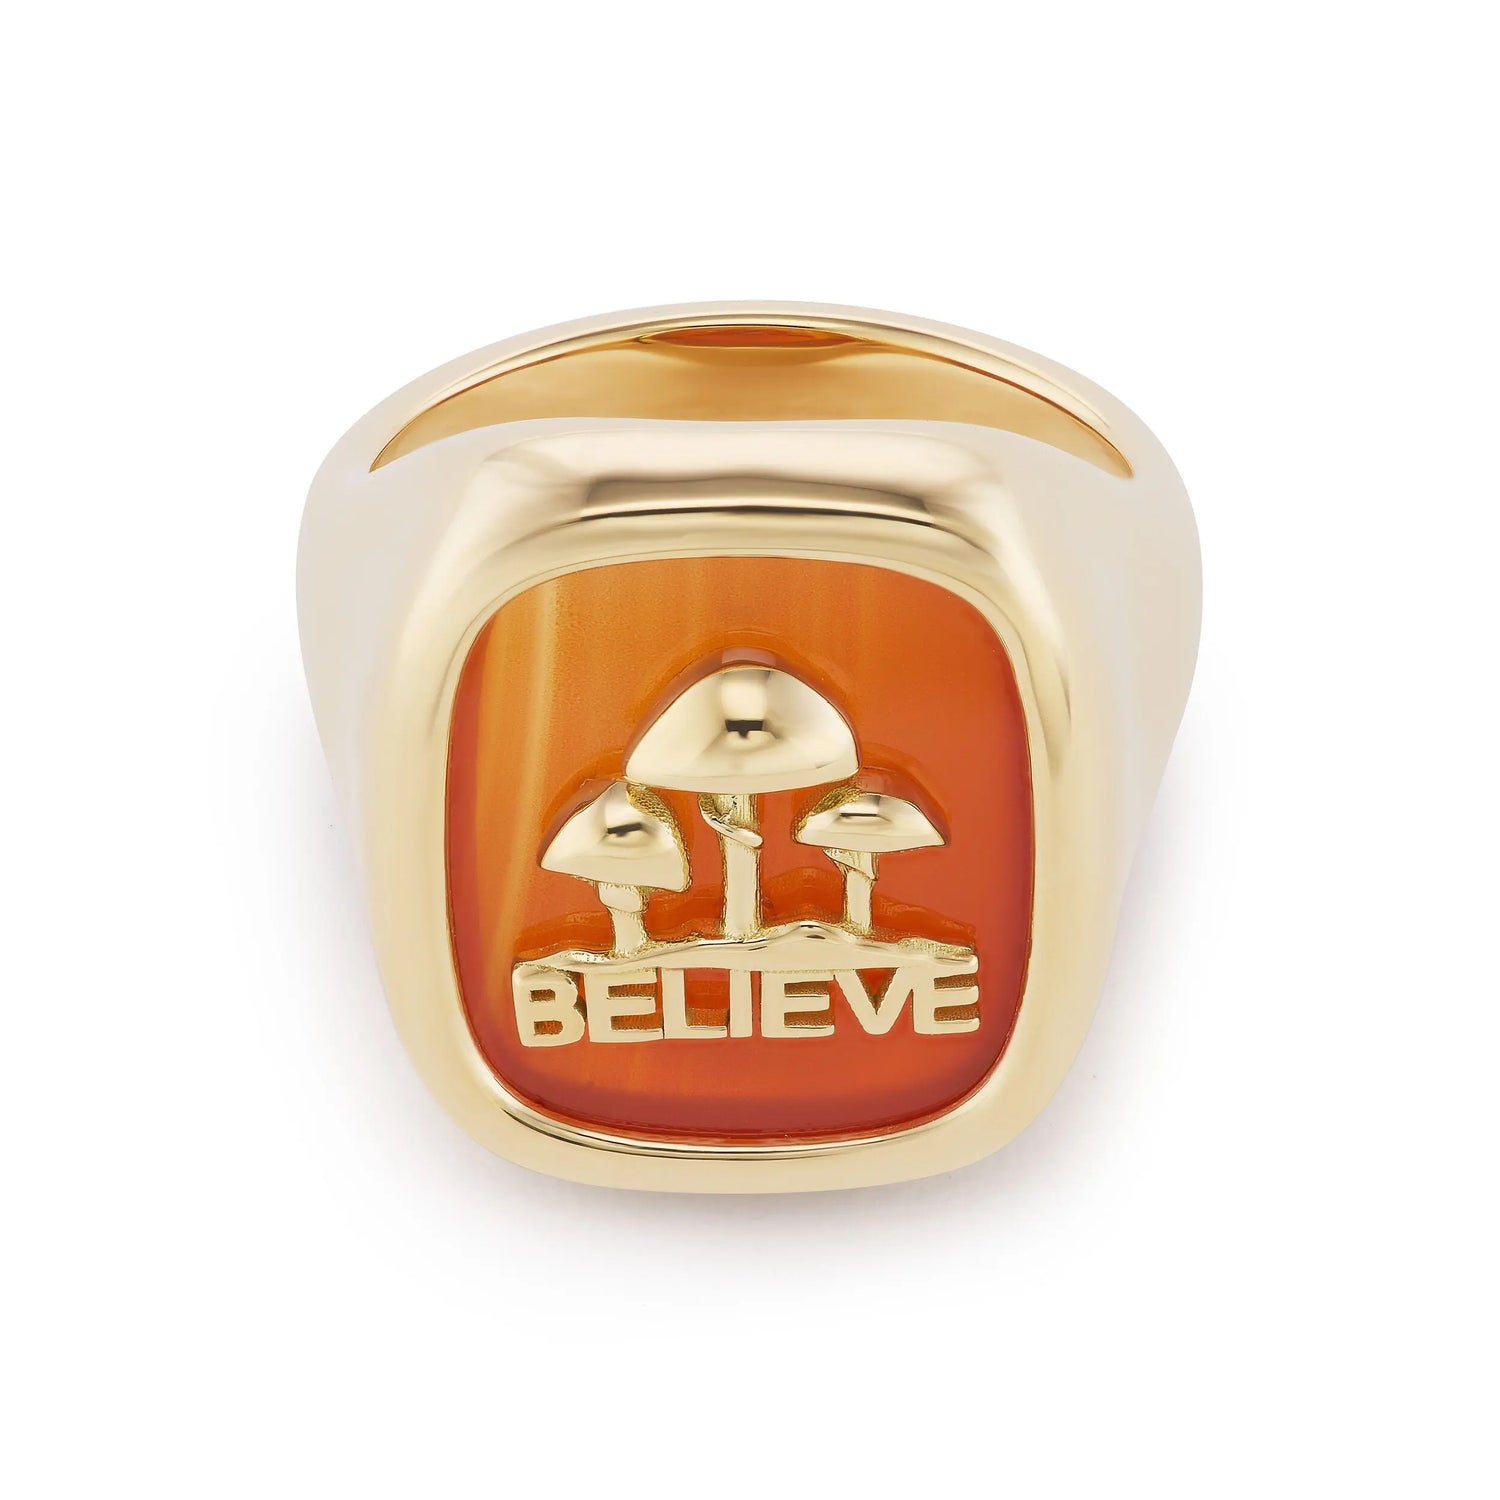 Believe" Ring set in 18K Yellow Gold with carved carnelian stone. The ring is size 6. If you need a different size, please email shop@sbvail.com.  Designed by Brent Neale and made in New York